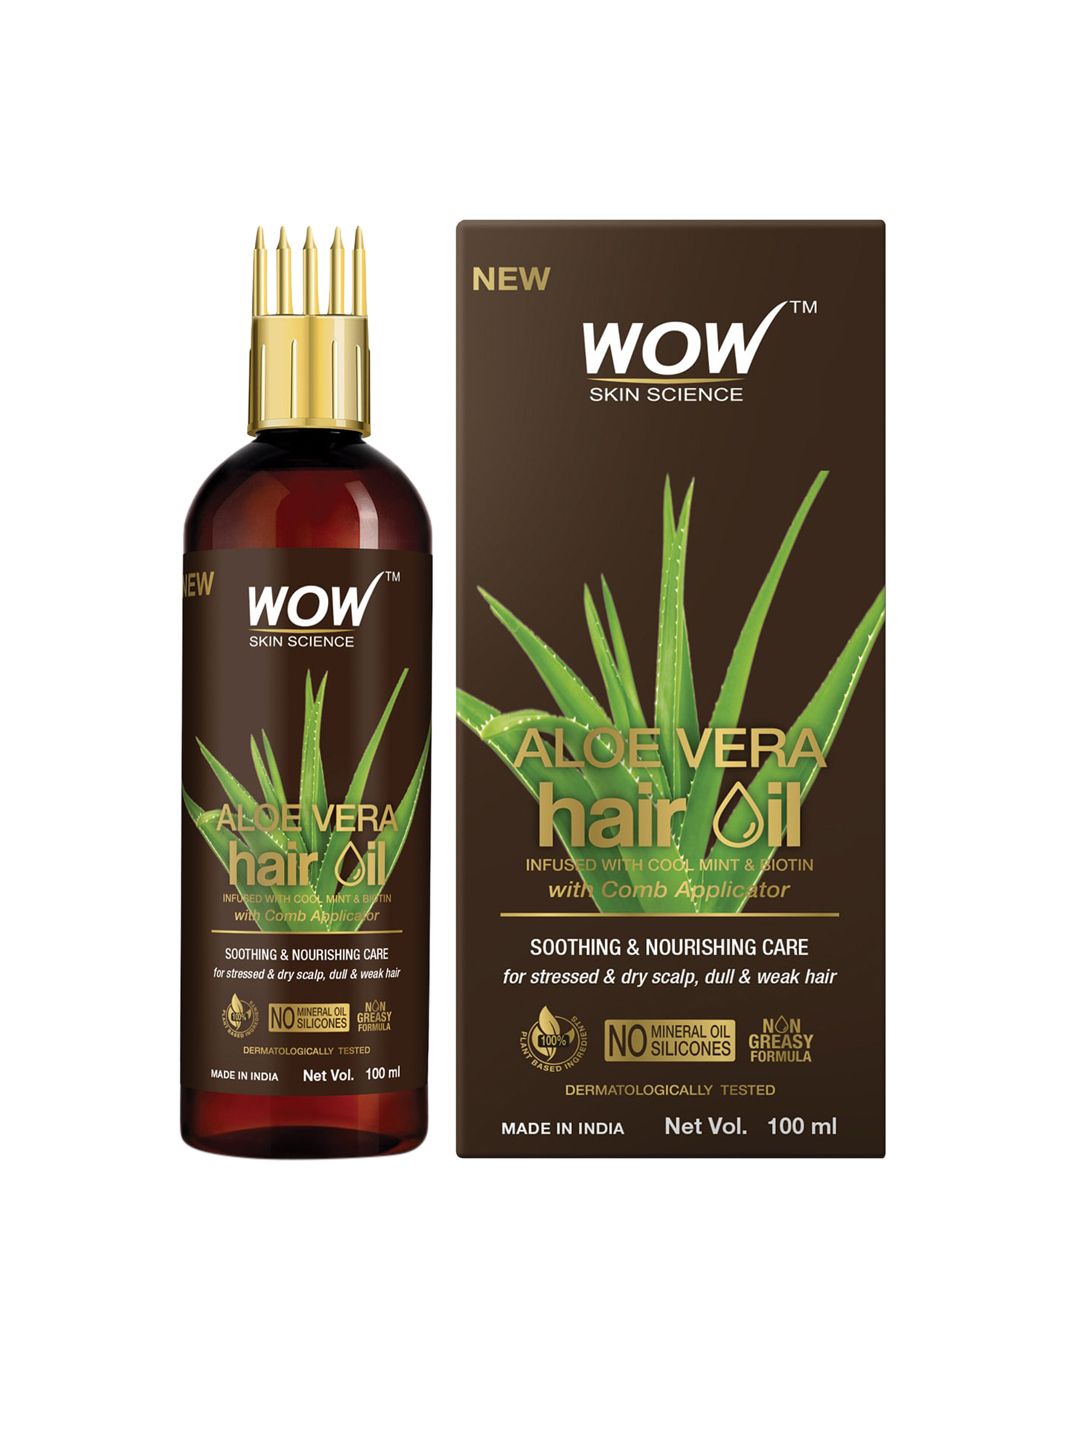 WOW SKIN SCIENCE Aloe Vera Hair Oil with Cool Mint & Biotin with Comb Application-100ml Price in India